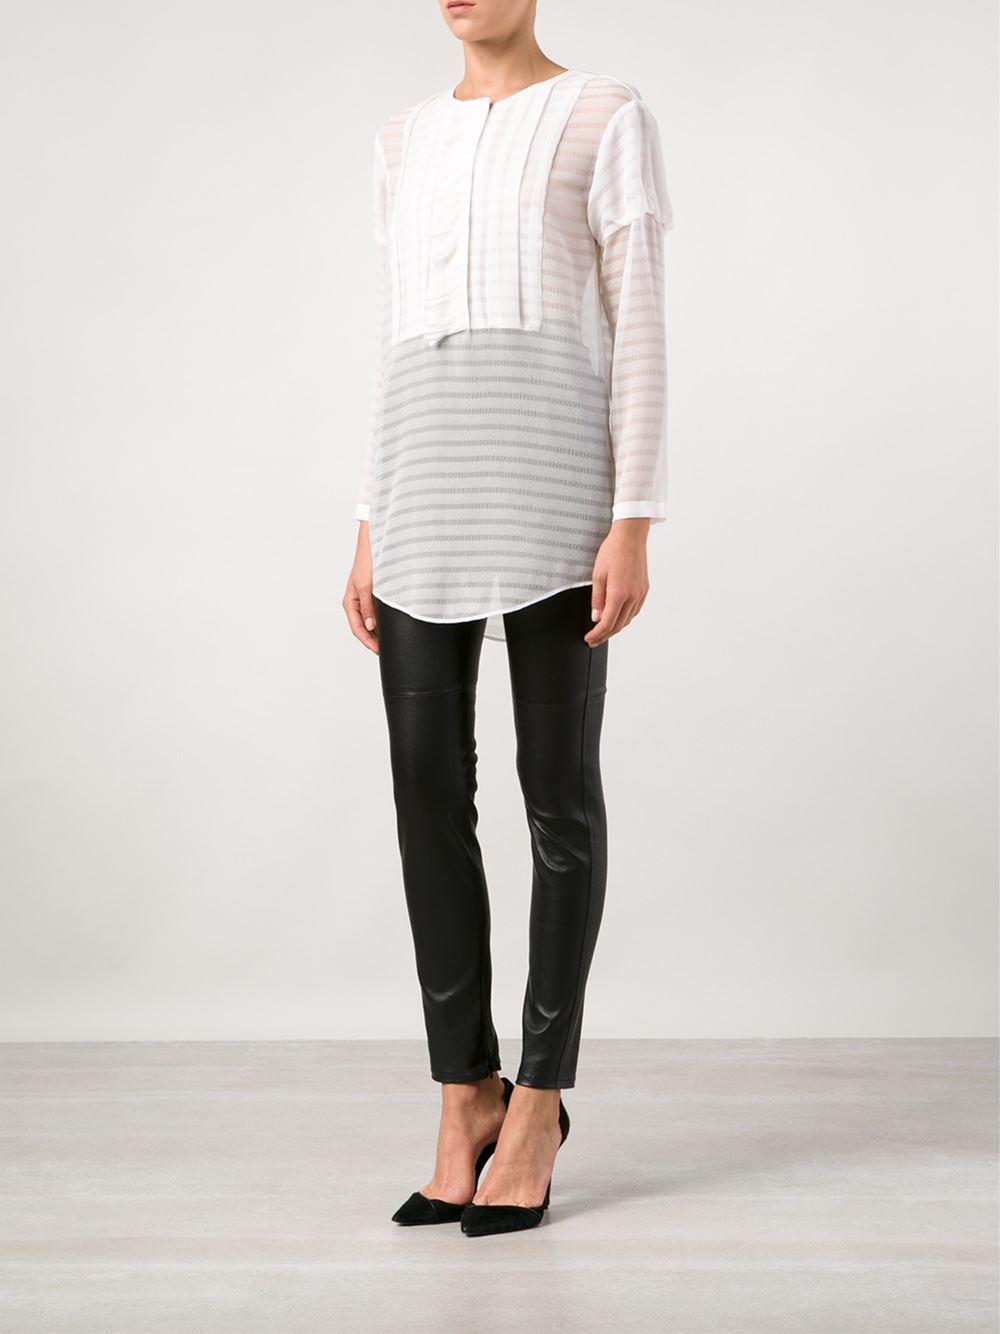 Burberry prorsum Sheer Striped Blouse in White | Lyst